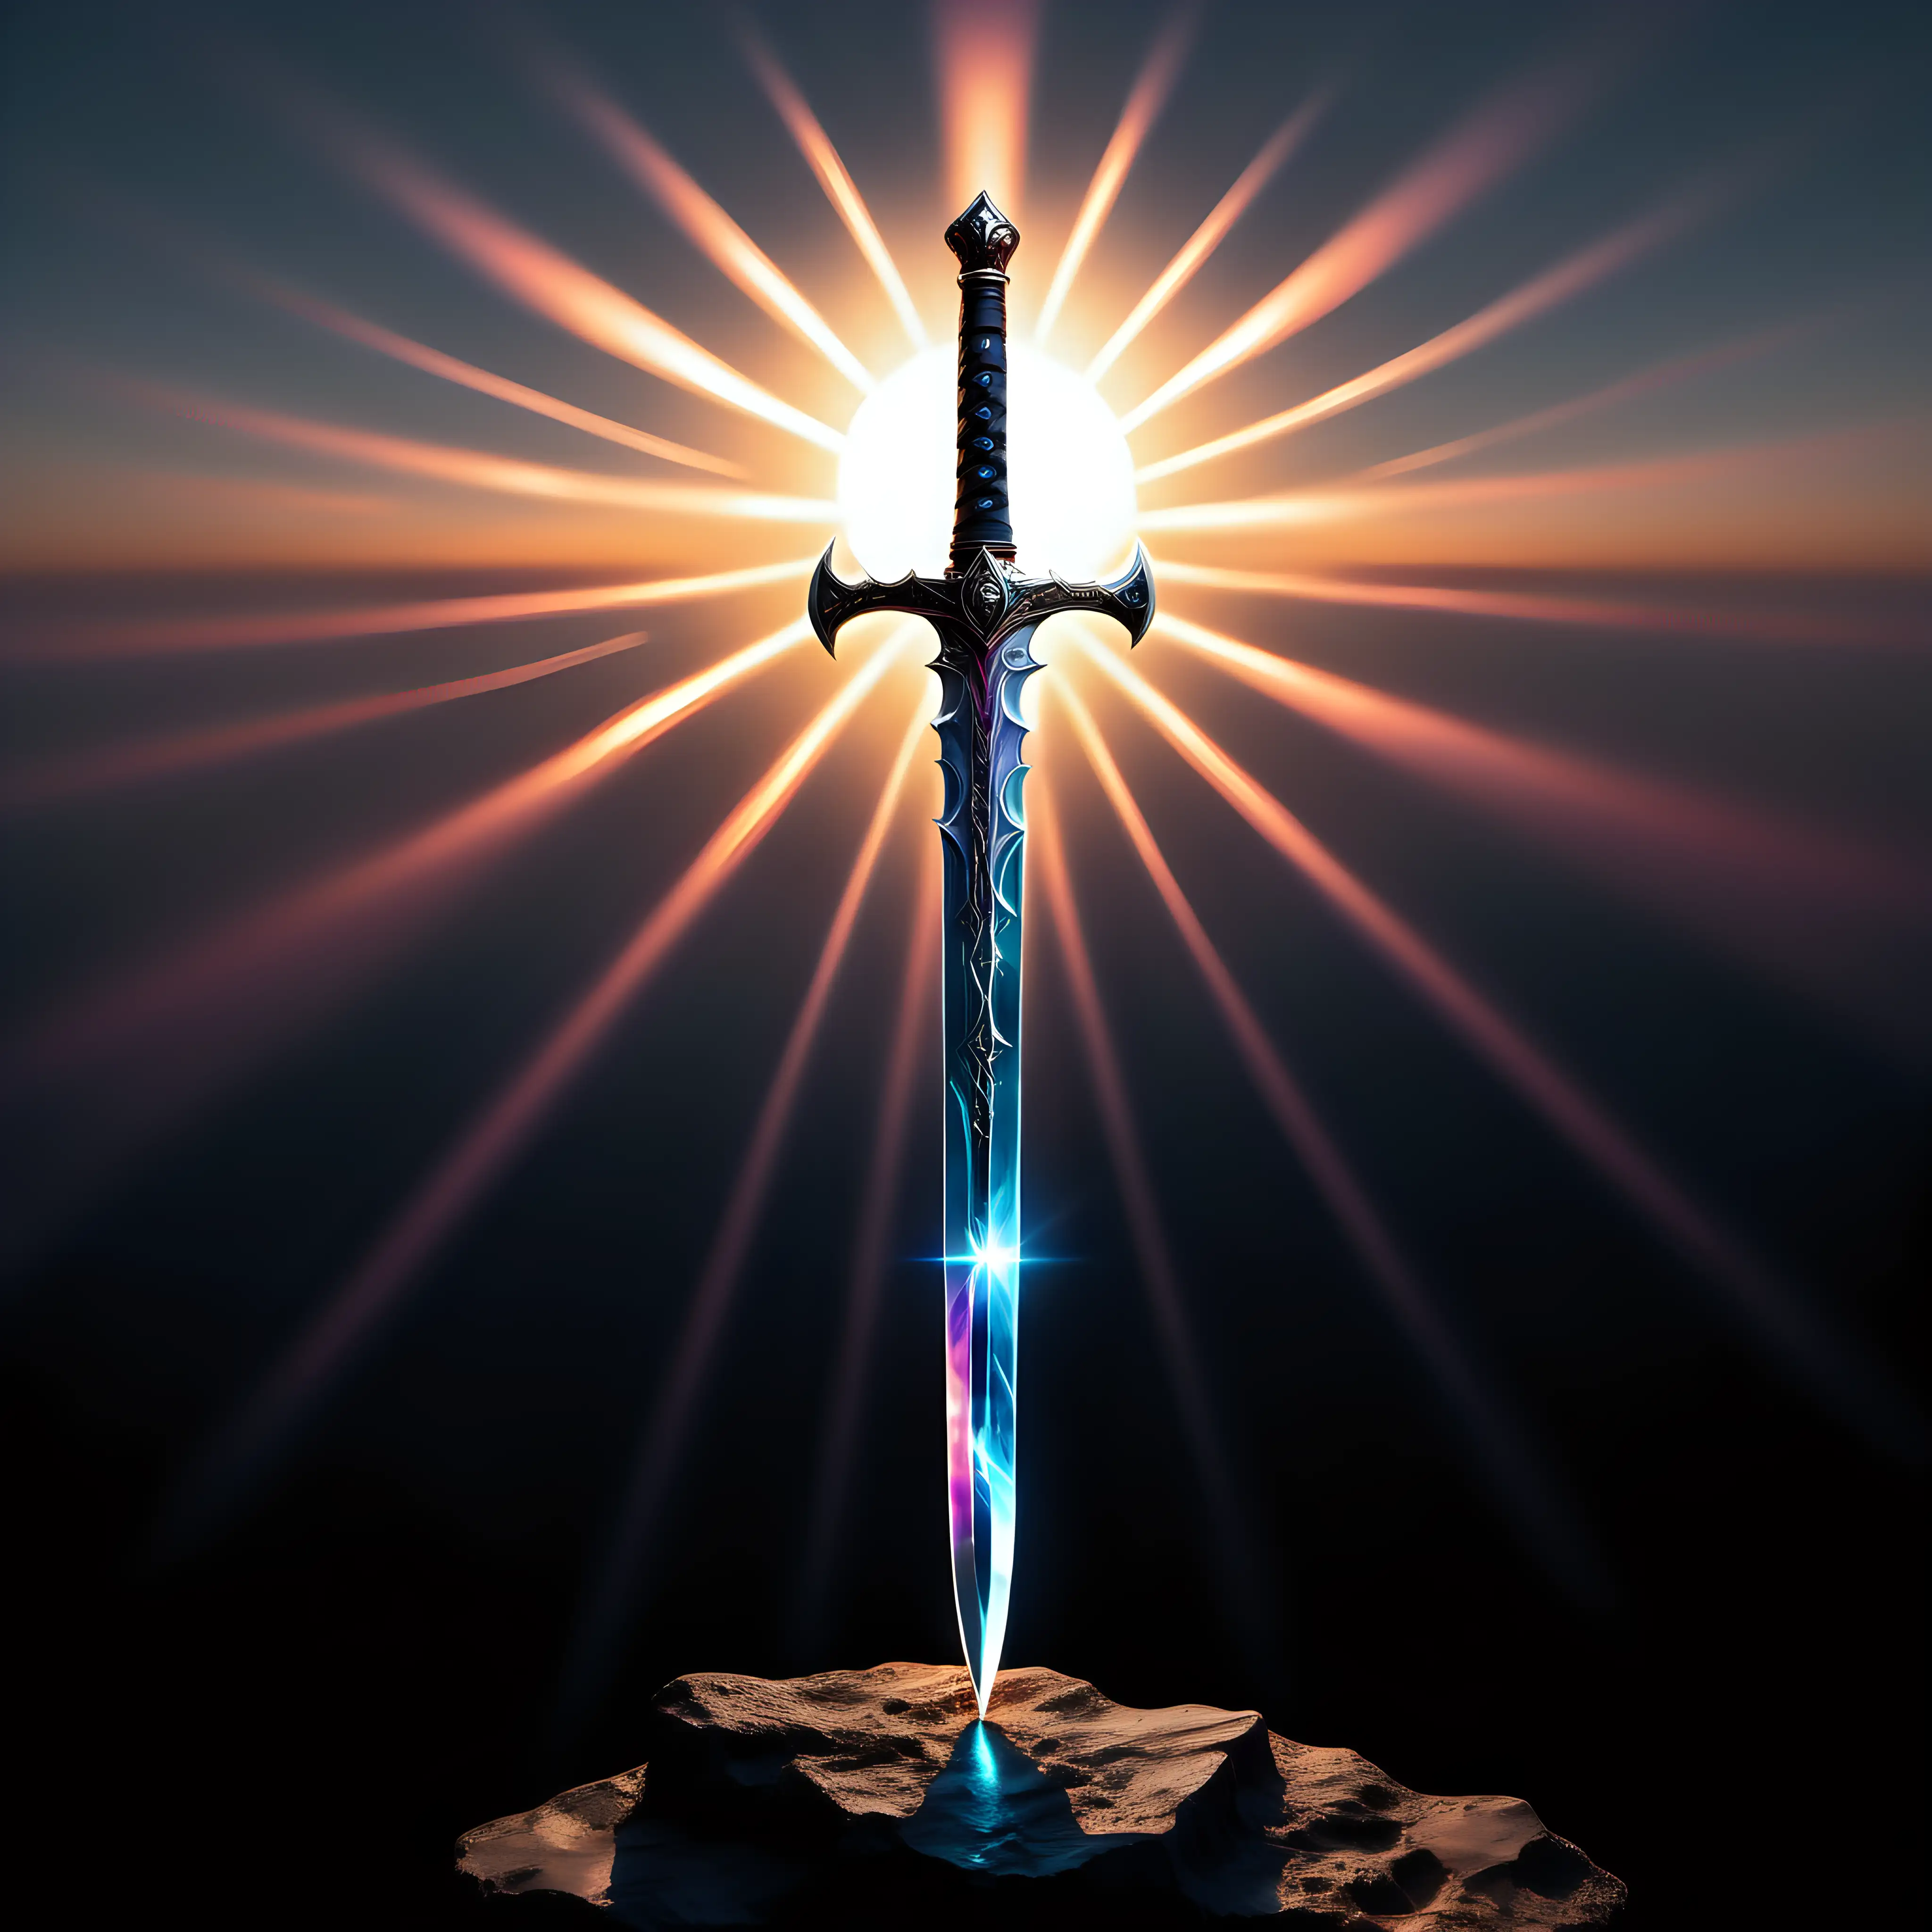 A luminous sword with the sky's sunset colors gradually fading on its surface and with sun rays on a transparent background